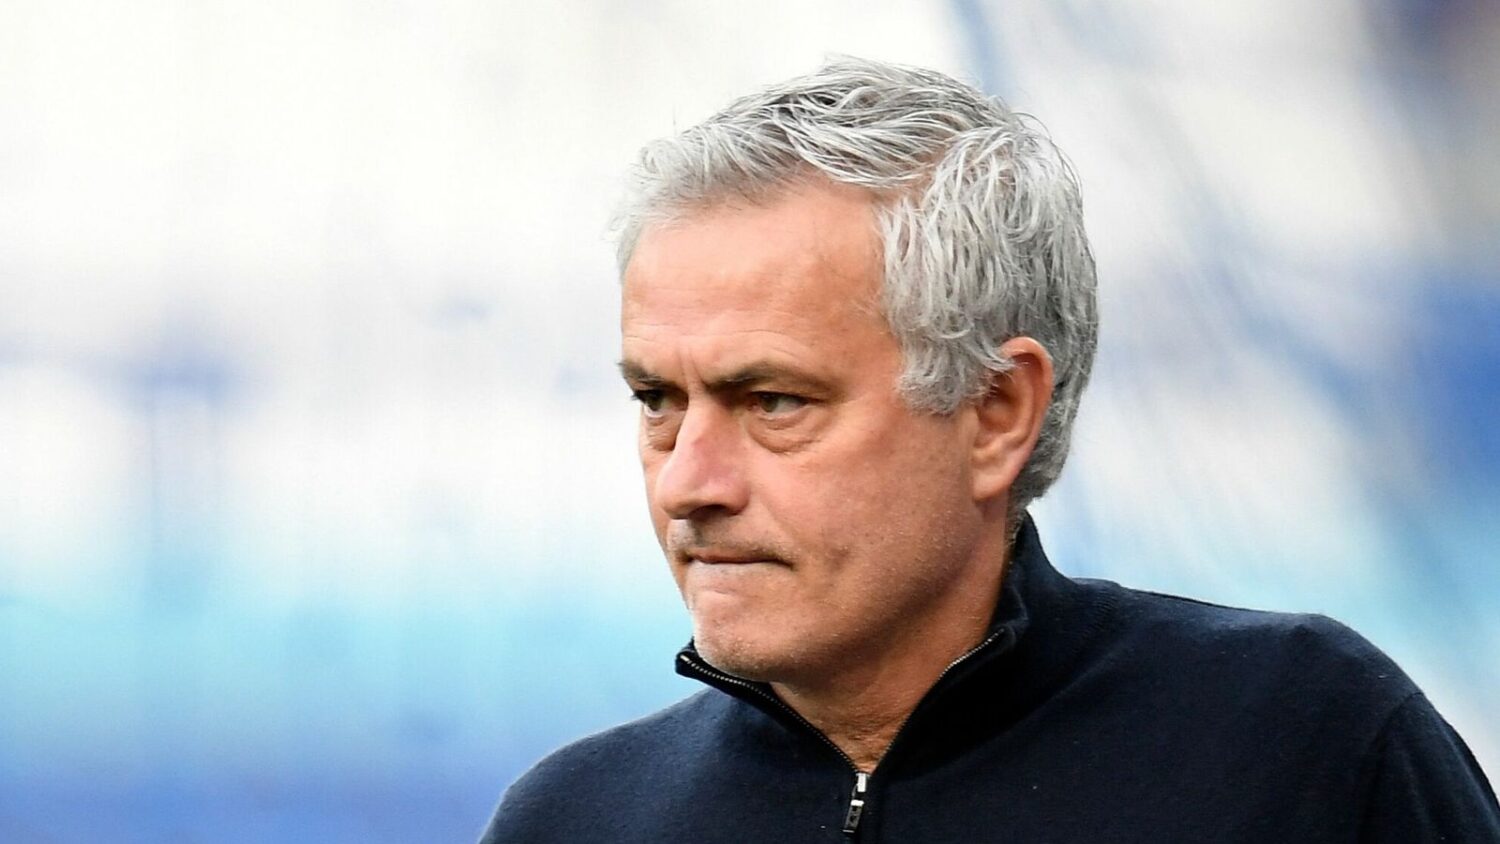 Breaking: Jose Mourinho signs 3-year deal with Roma